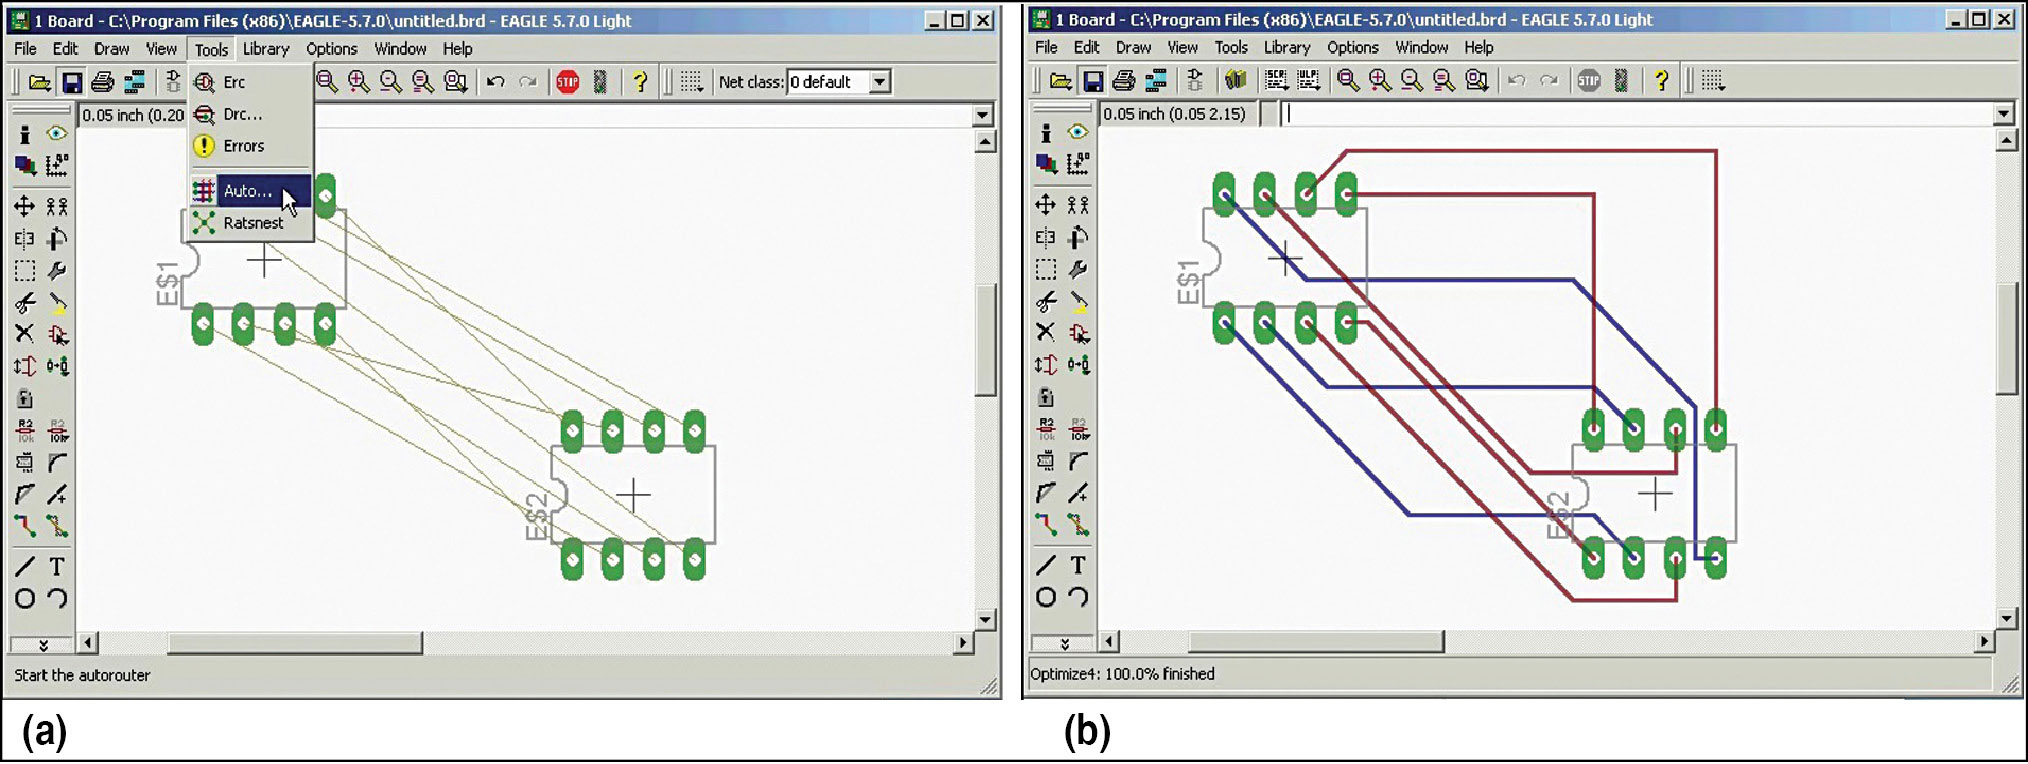 Fig. 2: Make your design route by itself: (a) before autorouting, and (b) after autorouting (Image courtesy: www.youtube.com)